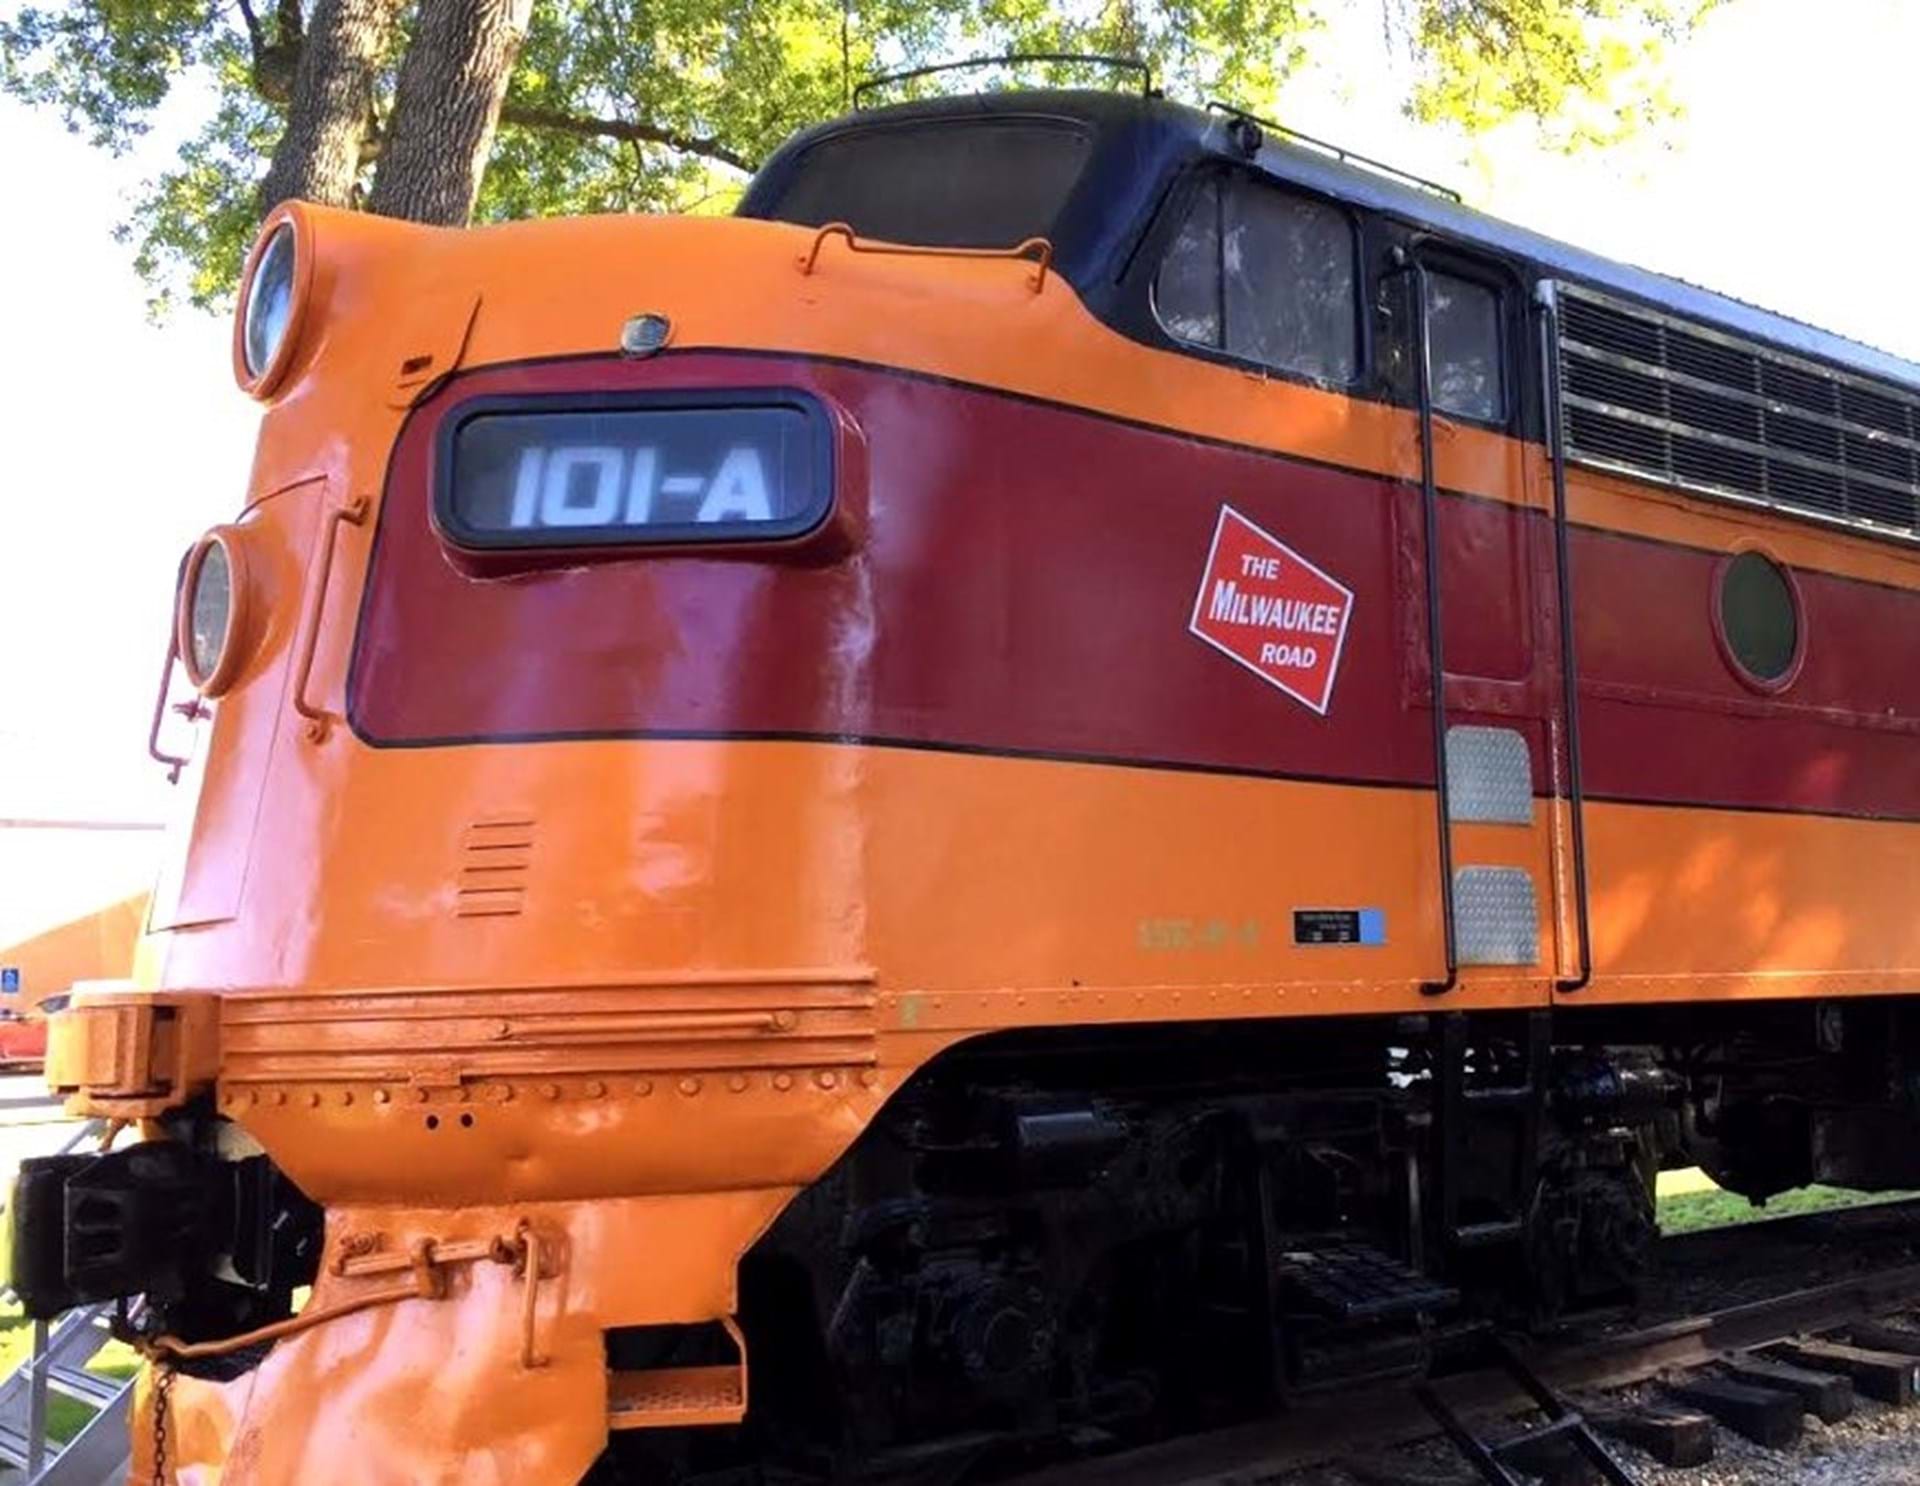 Check out this restored train in Cresco!